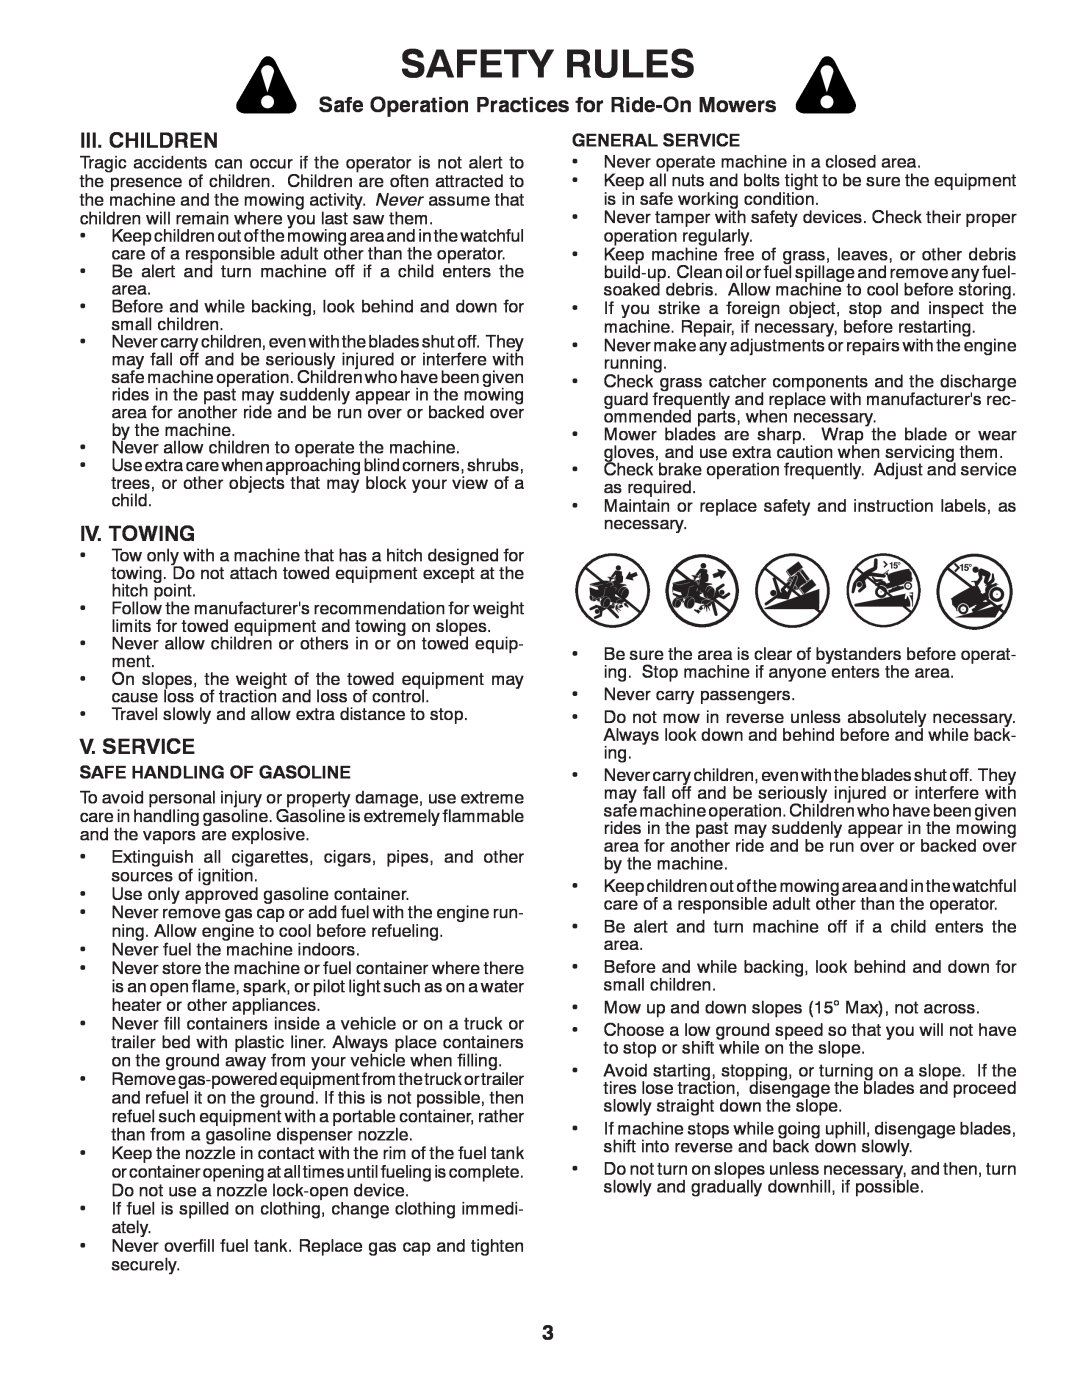 Murray 96012007200 manual Iii. Children, Iv. Towing, V. Service, Safety Rules, Safe Operation Practices for Ride-OnMowers 